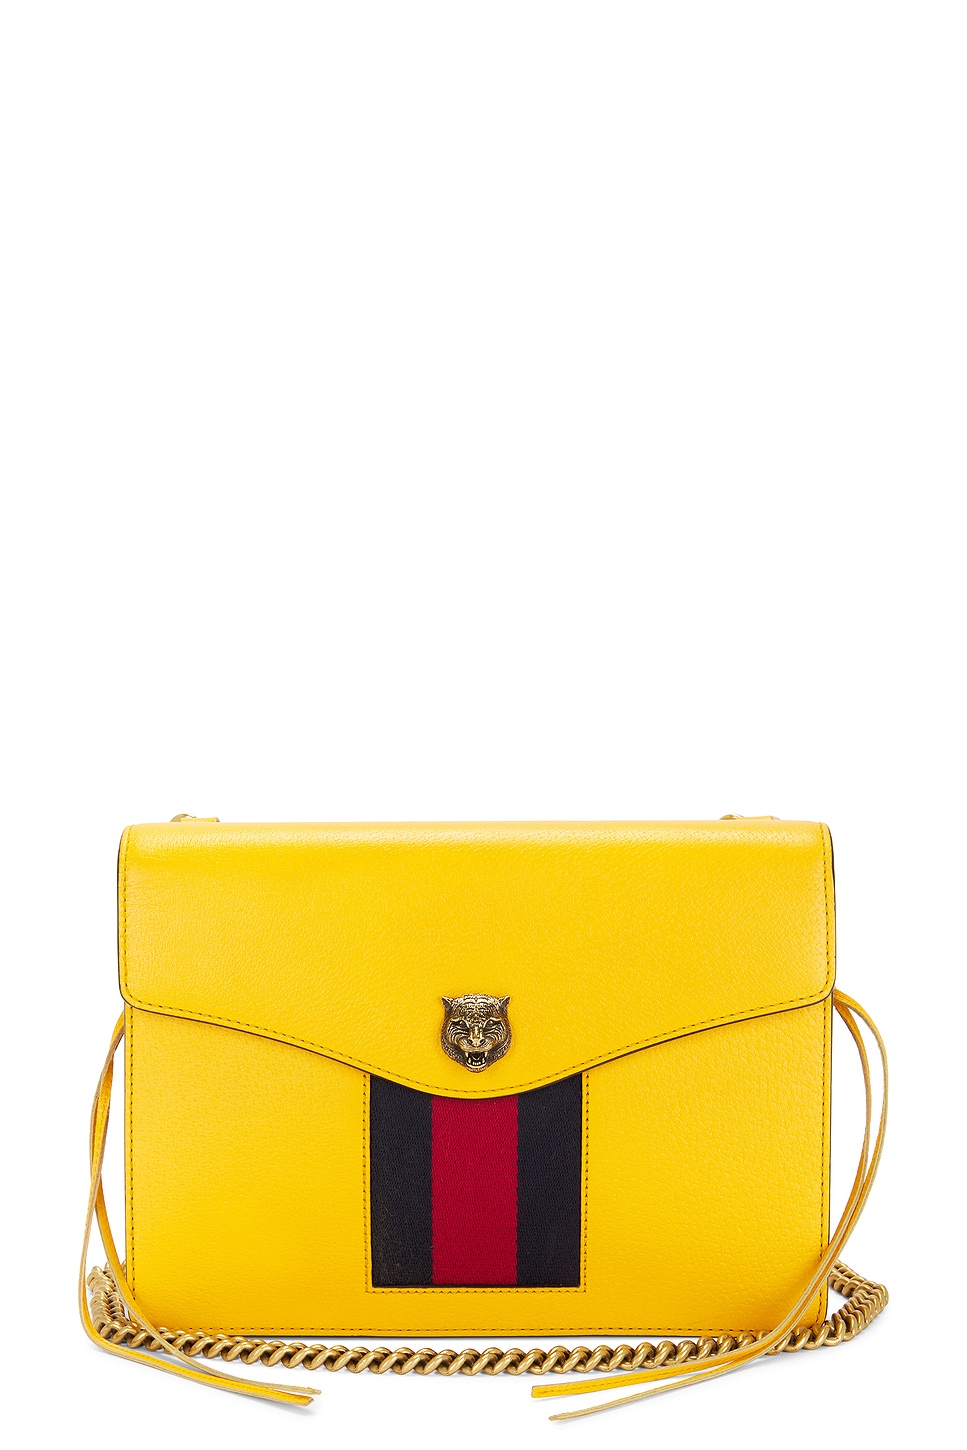 Gucci 2 Way Chain Leather Shoulder Bag In Yellow